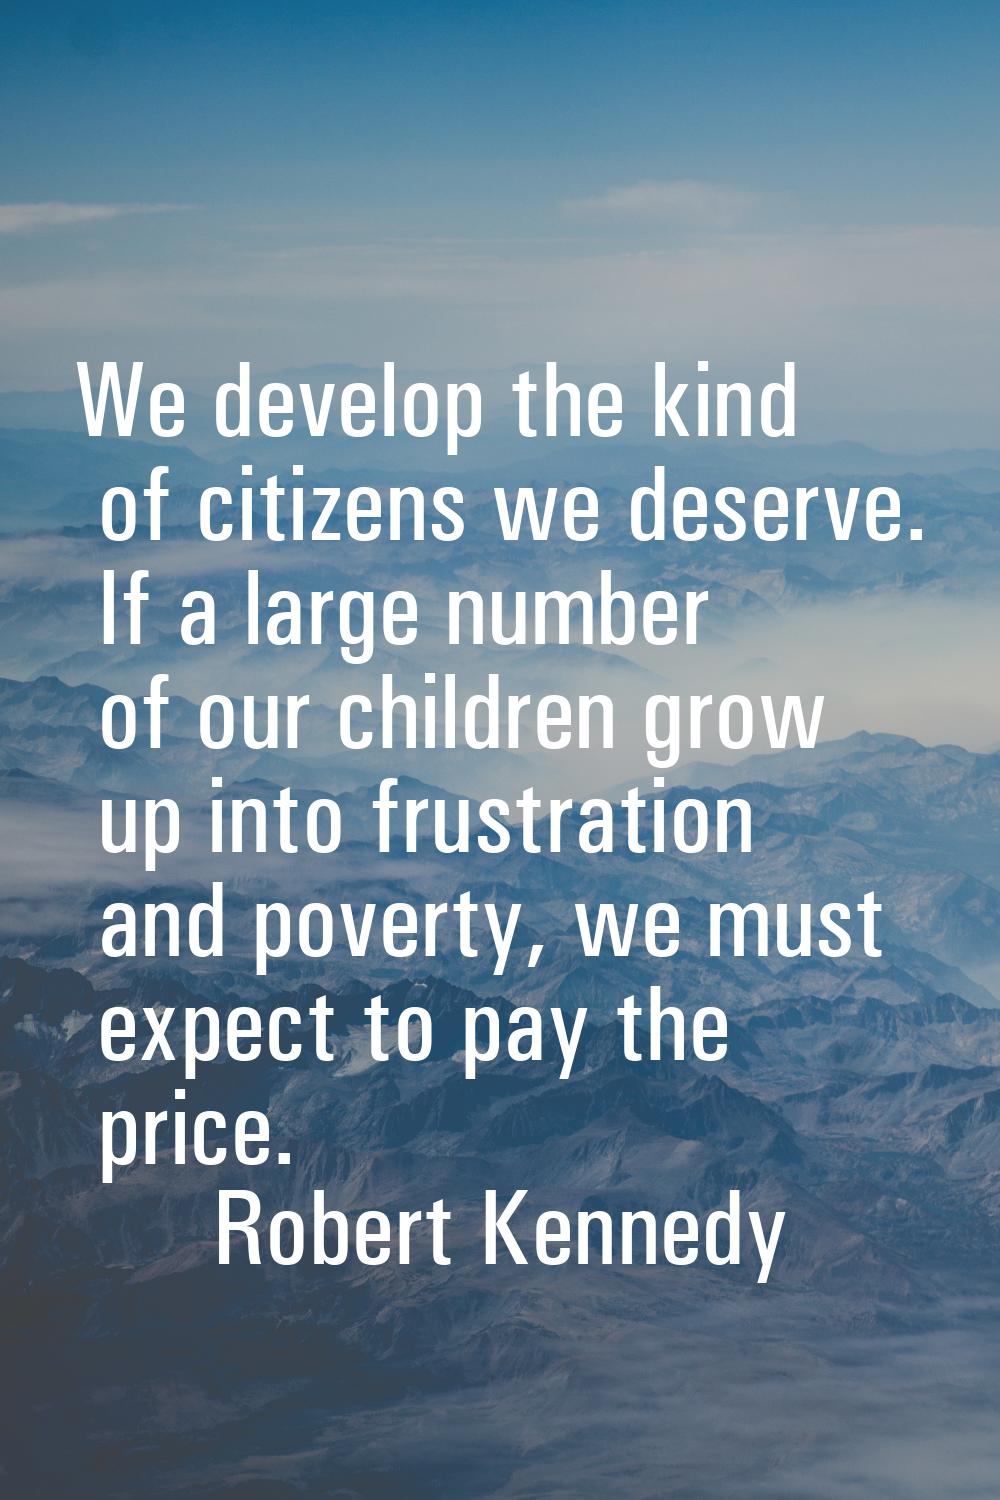 We develop the kind of citizens we deserve. If a large number of our children grow up into frustrat